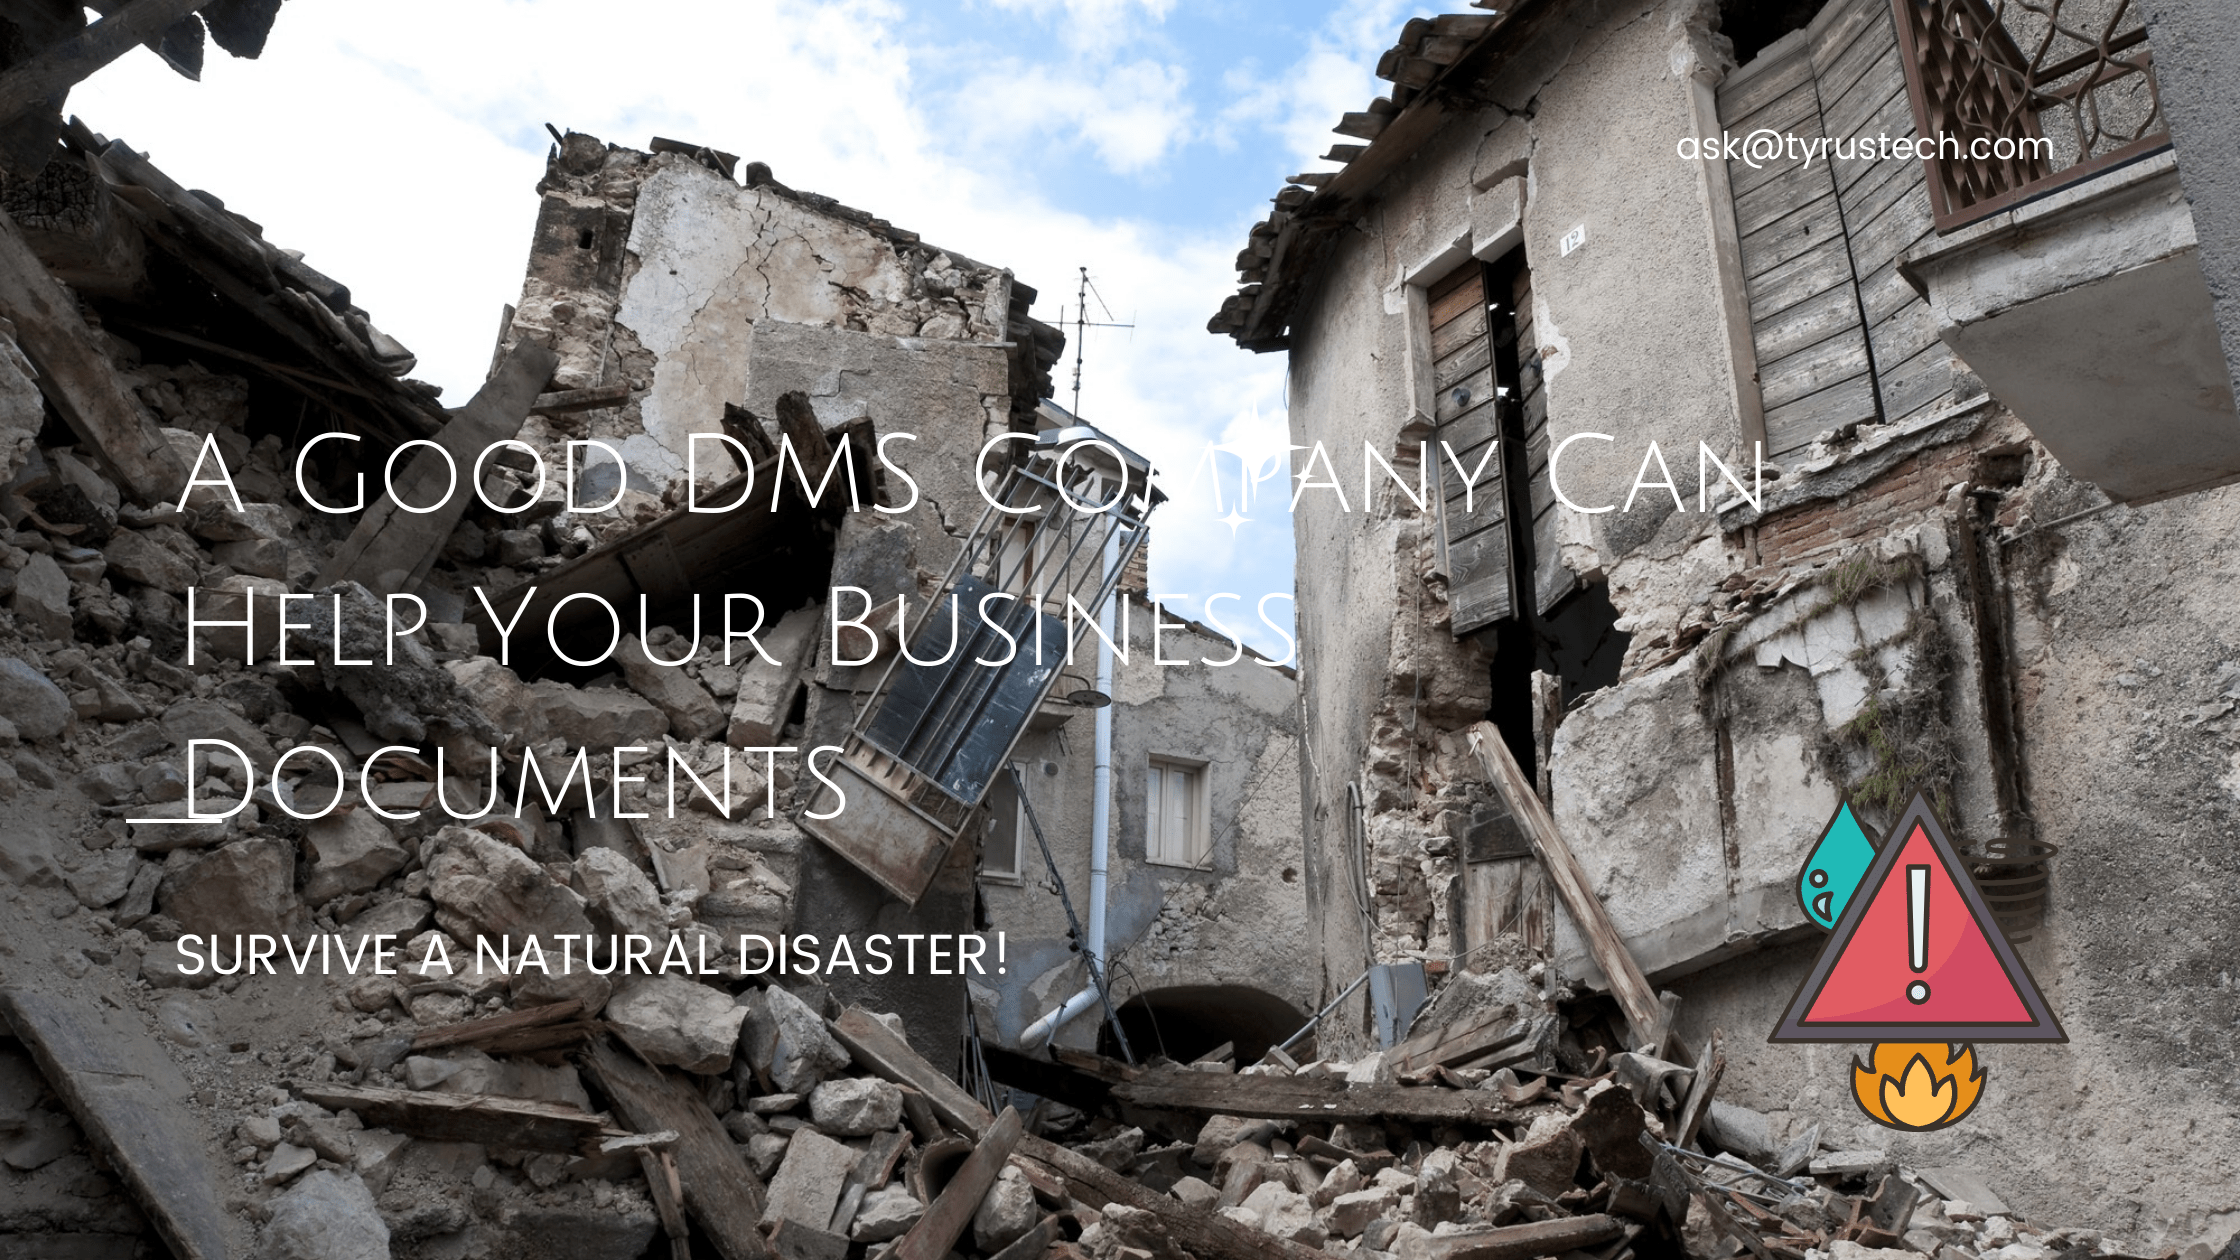 A Good DMS Company Can Help Your Business Documents Survive a Natural Disaster!